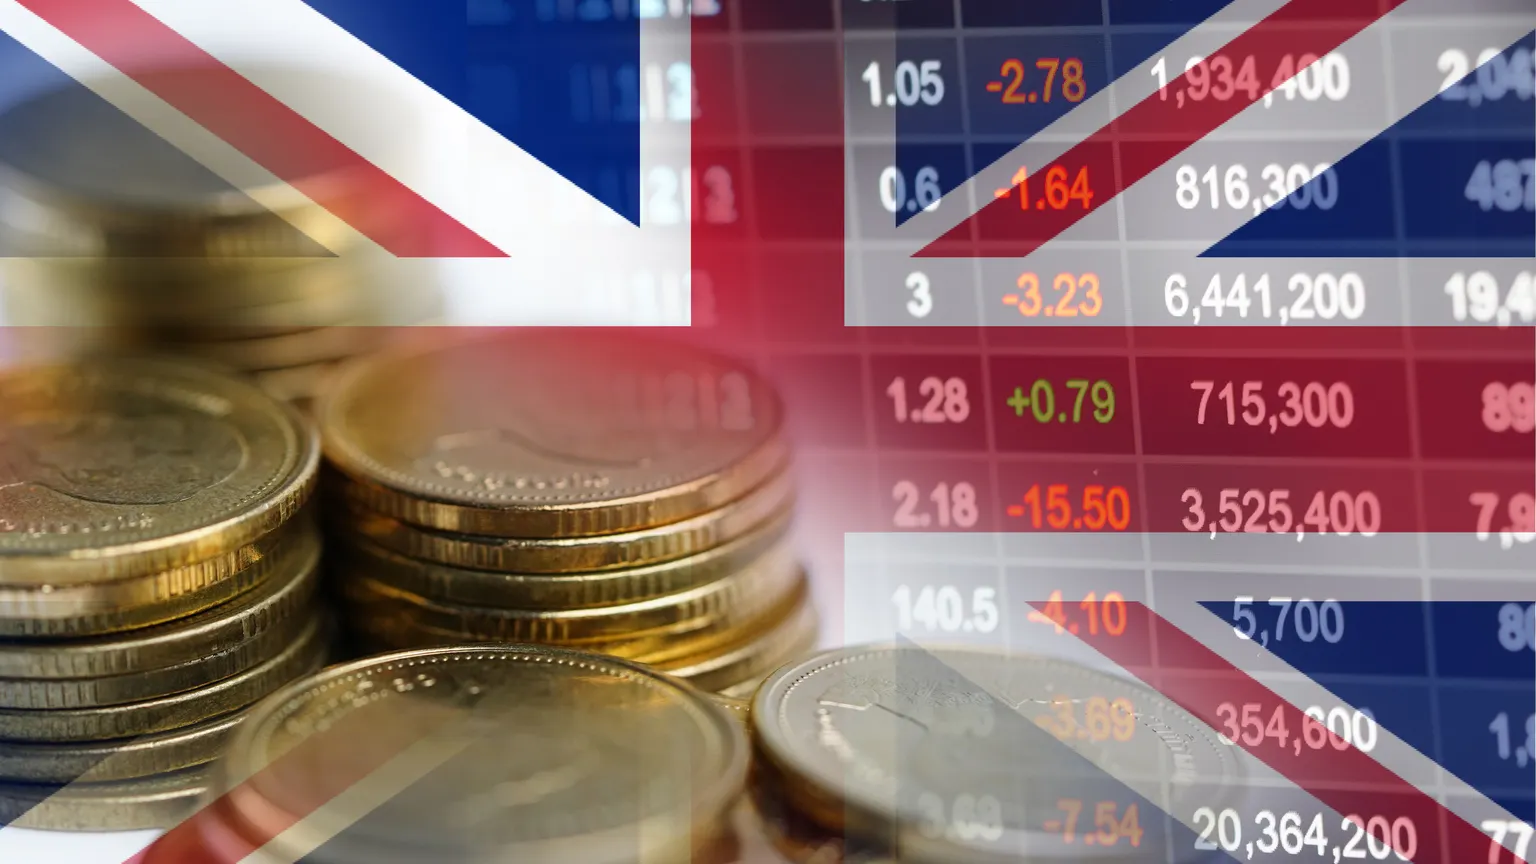 uk-predicted-to-be-one-of-the-worst-performing-major-economies-in-2023-says-imf